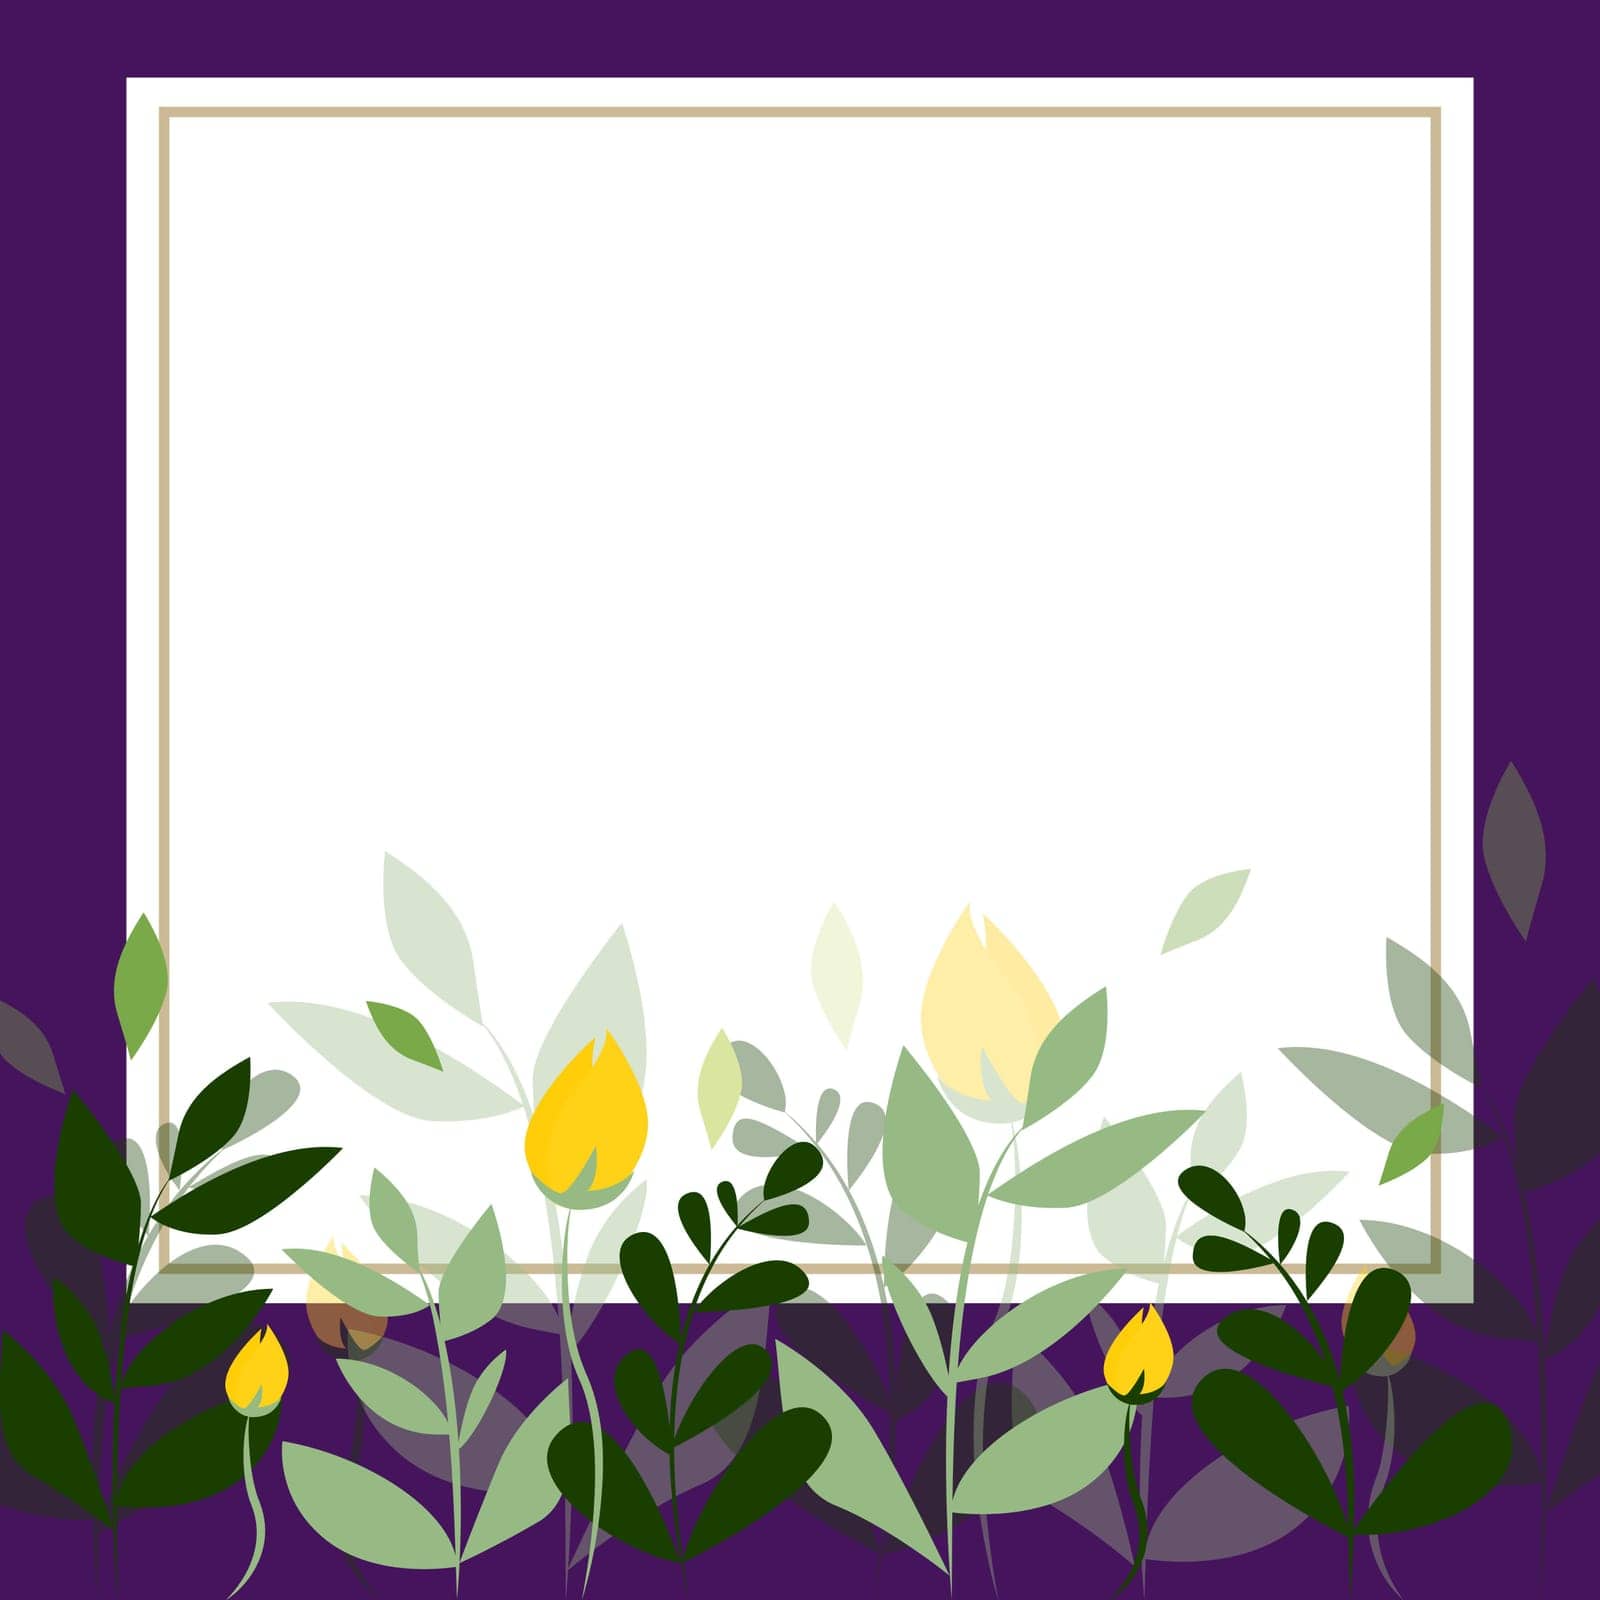 Frame Decorated With Colorful Flowers And Foliage Arranged Harmoniously. Empty Poster Border Surrounded By Multicolored Bouquet Organized Pleasantly. Dark Purple color. by nialowwa